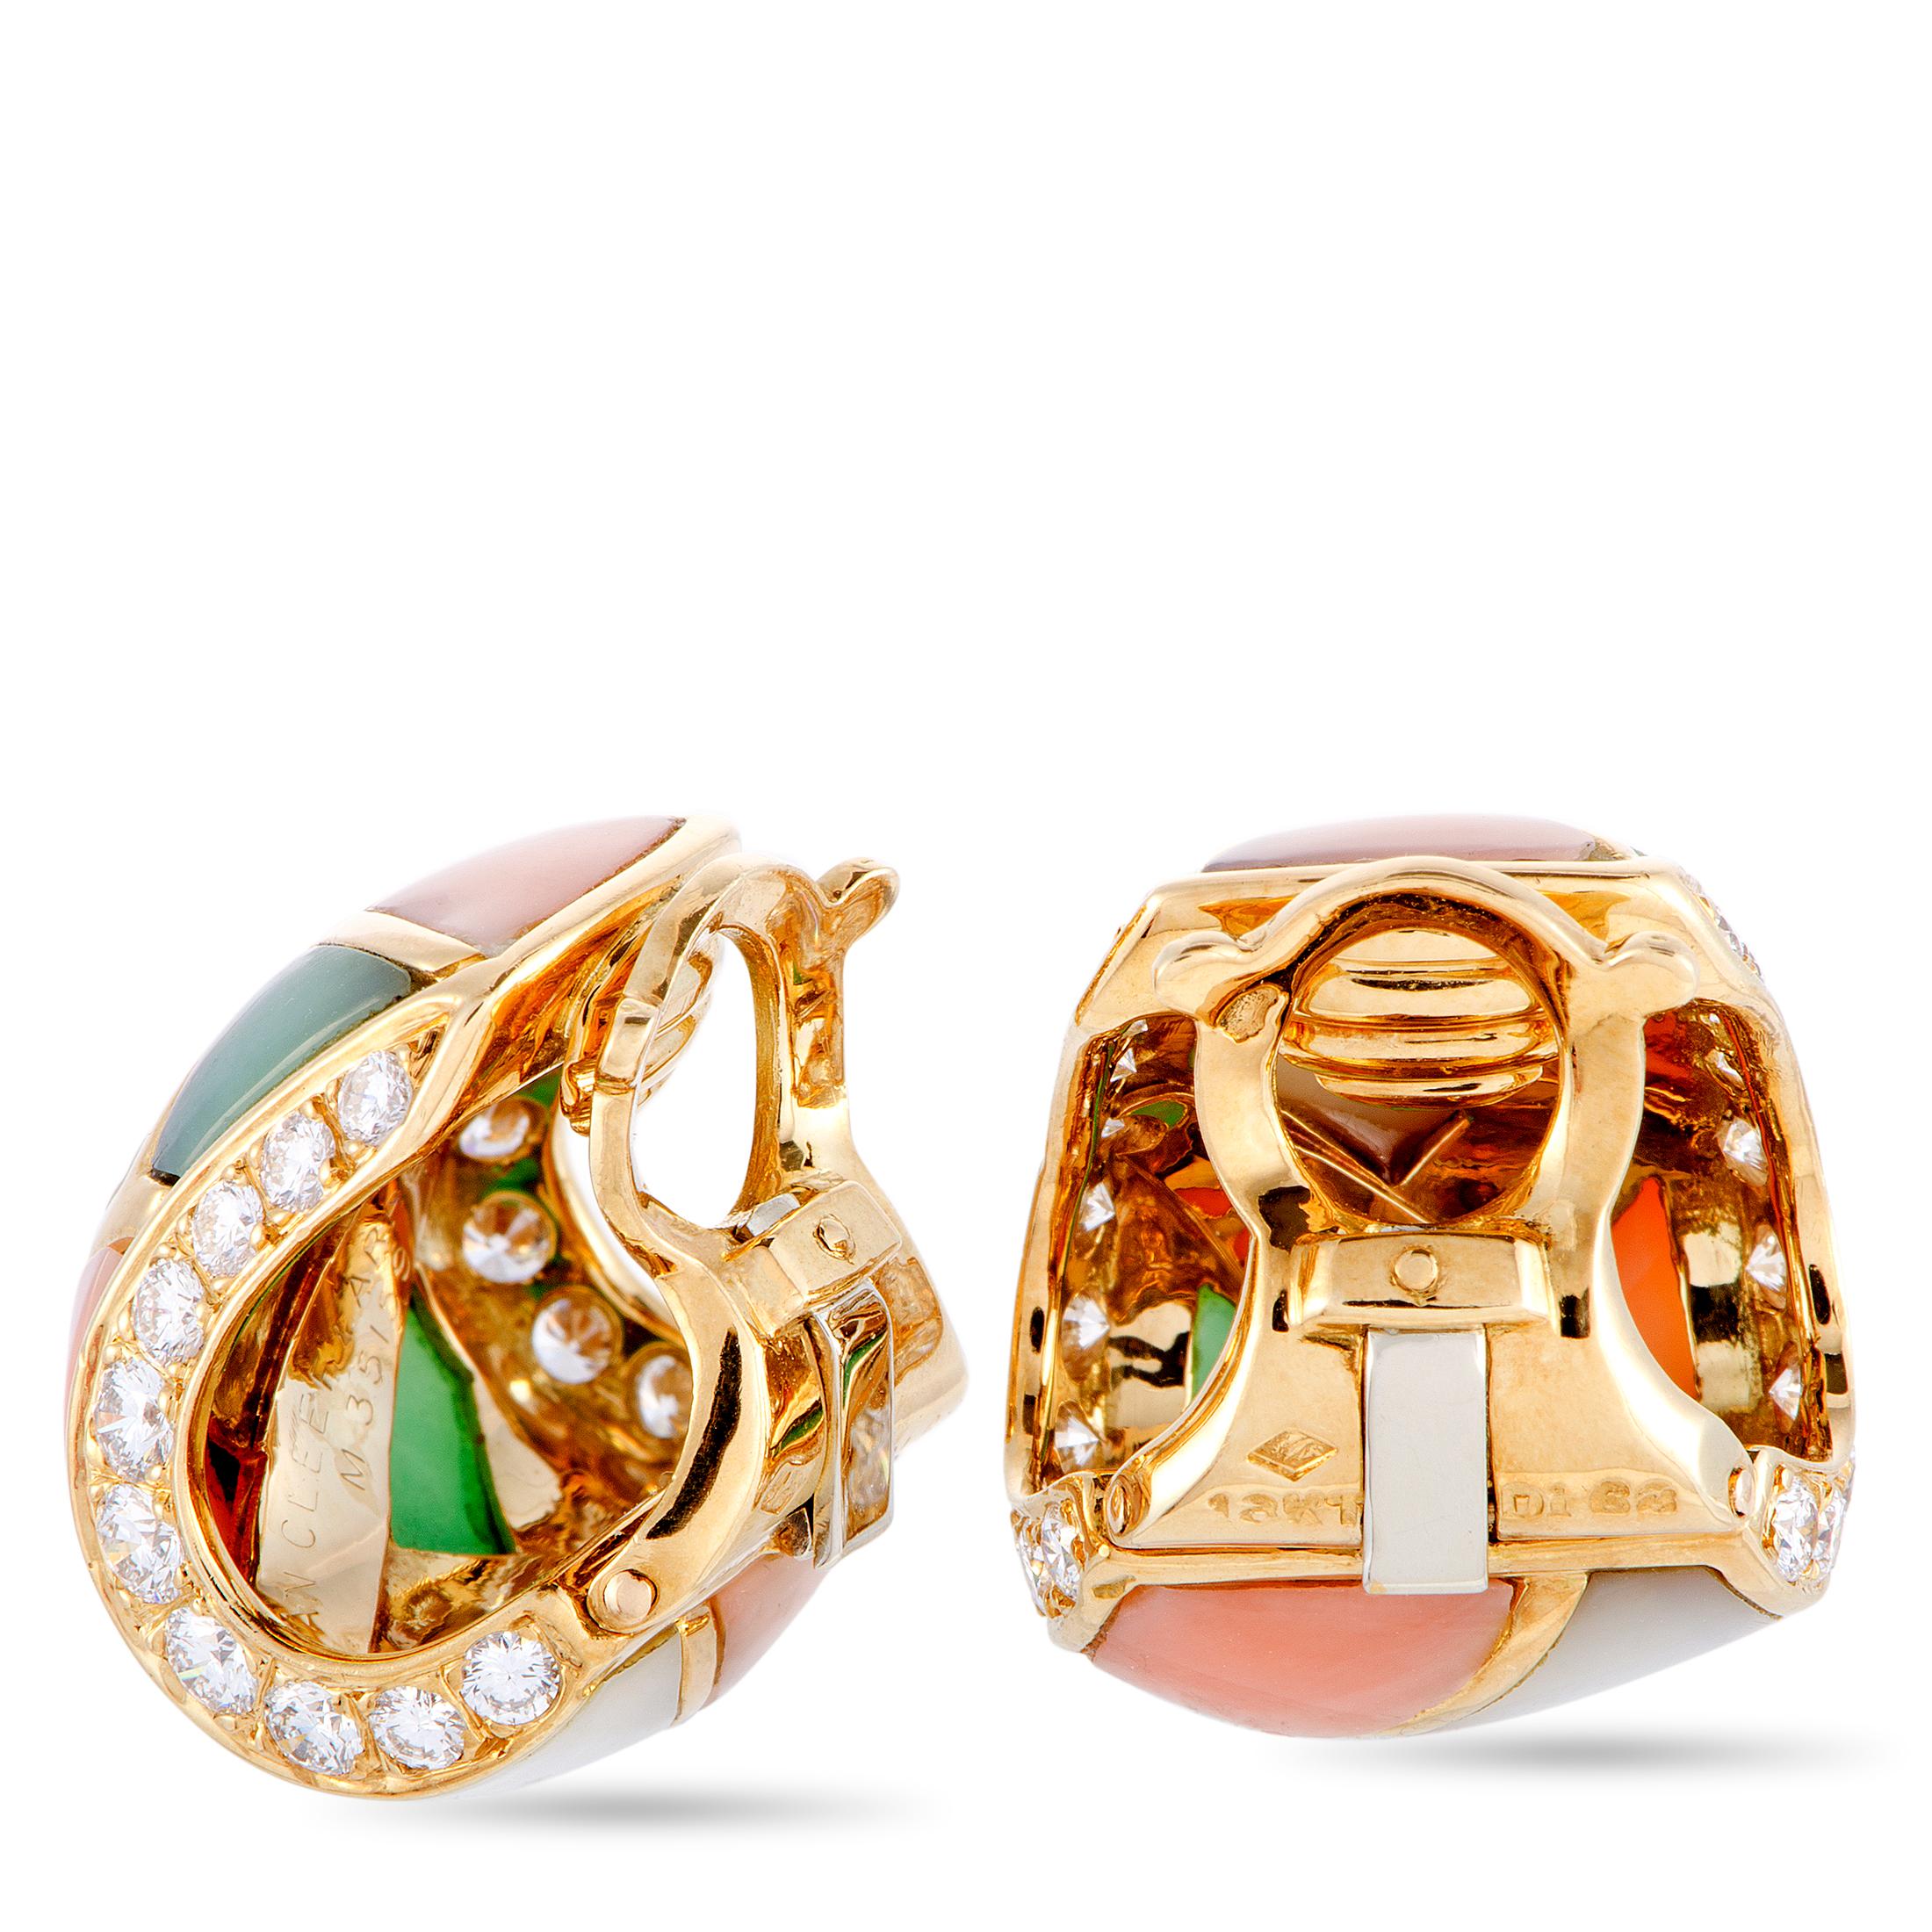 These very rare vintage earrings from Van Cleef & Arpels are crafted from 18K yellow gold and each of the two weighs 12.1 grams. The pair is set with mother of pearl, coral, chrysoprase, and a total of 1.68 carats of diamonds. The earrings measure